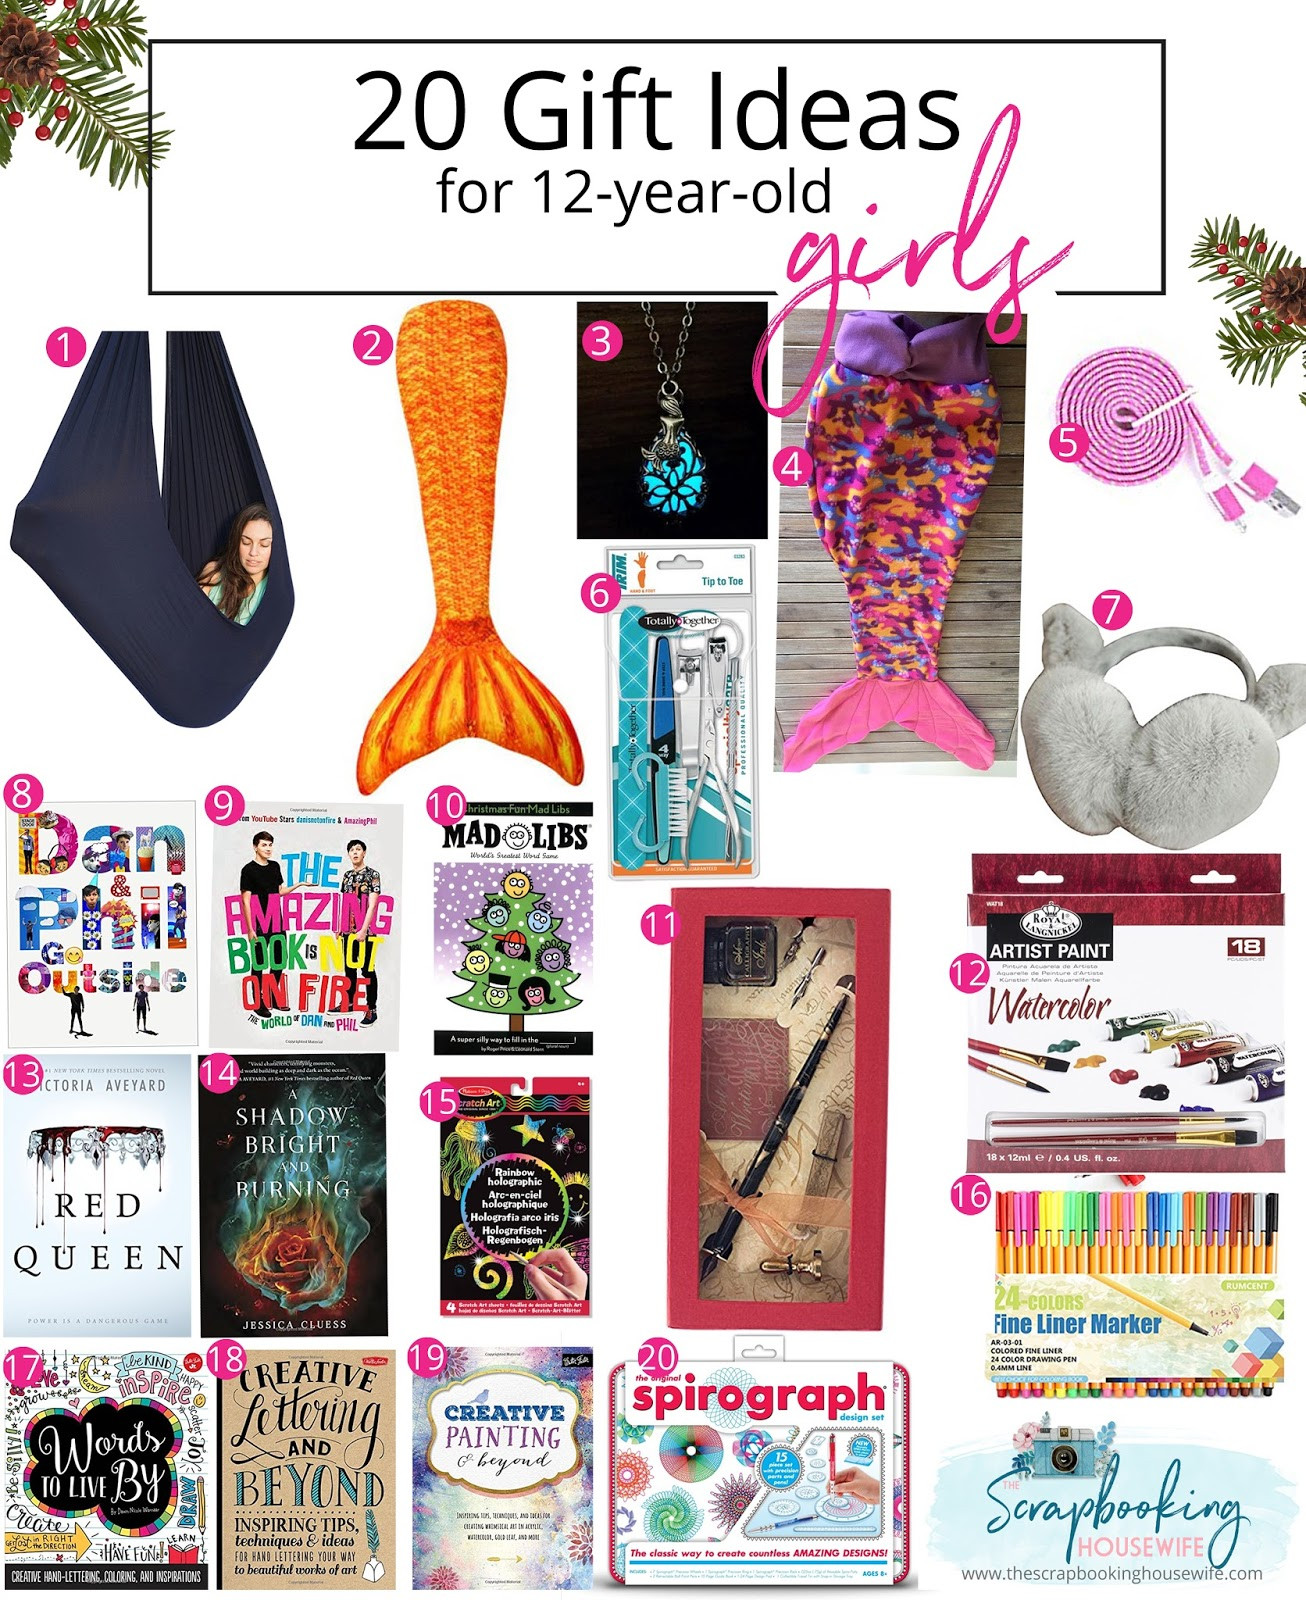 Gift Ideas For Girls 12
 Ellabella Designs 20 GIFT IDEAS FOR 12 YEAR OLD TWEEN